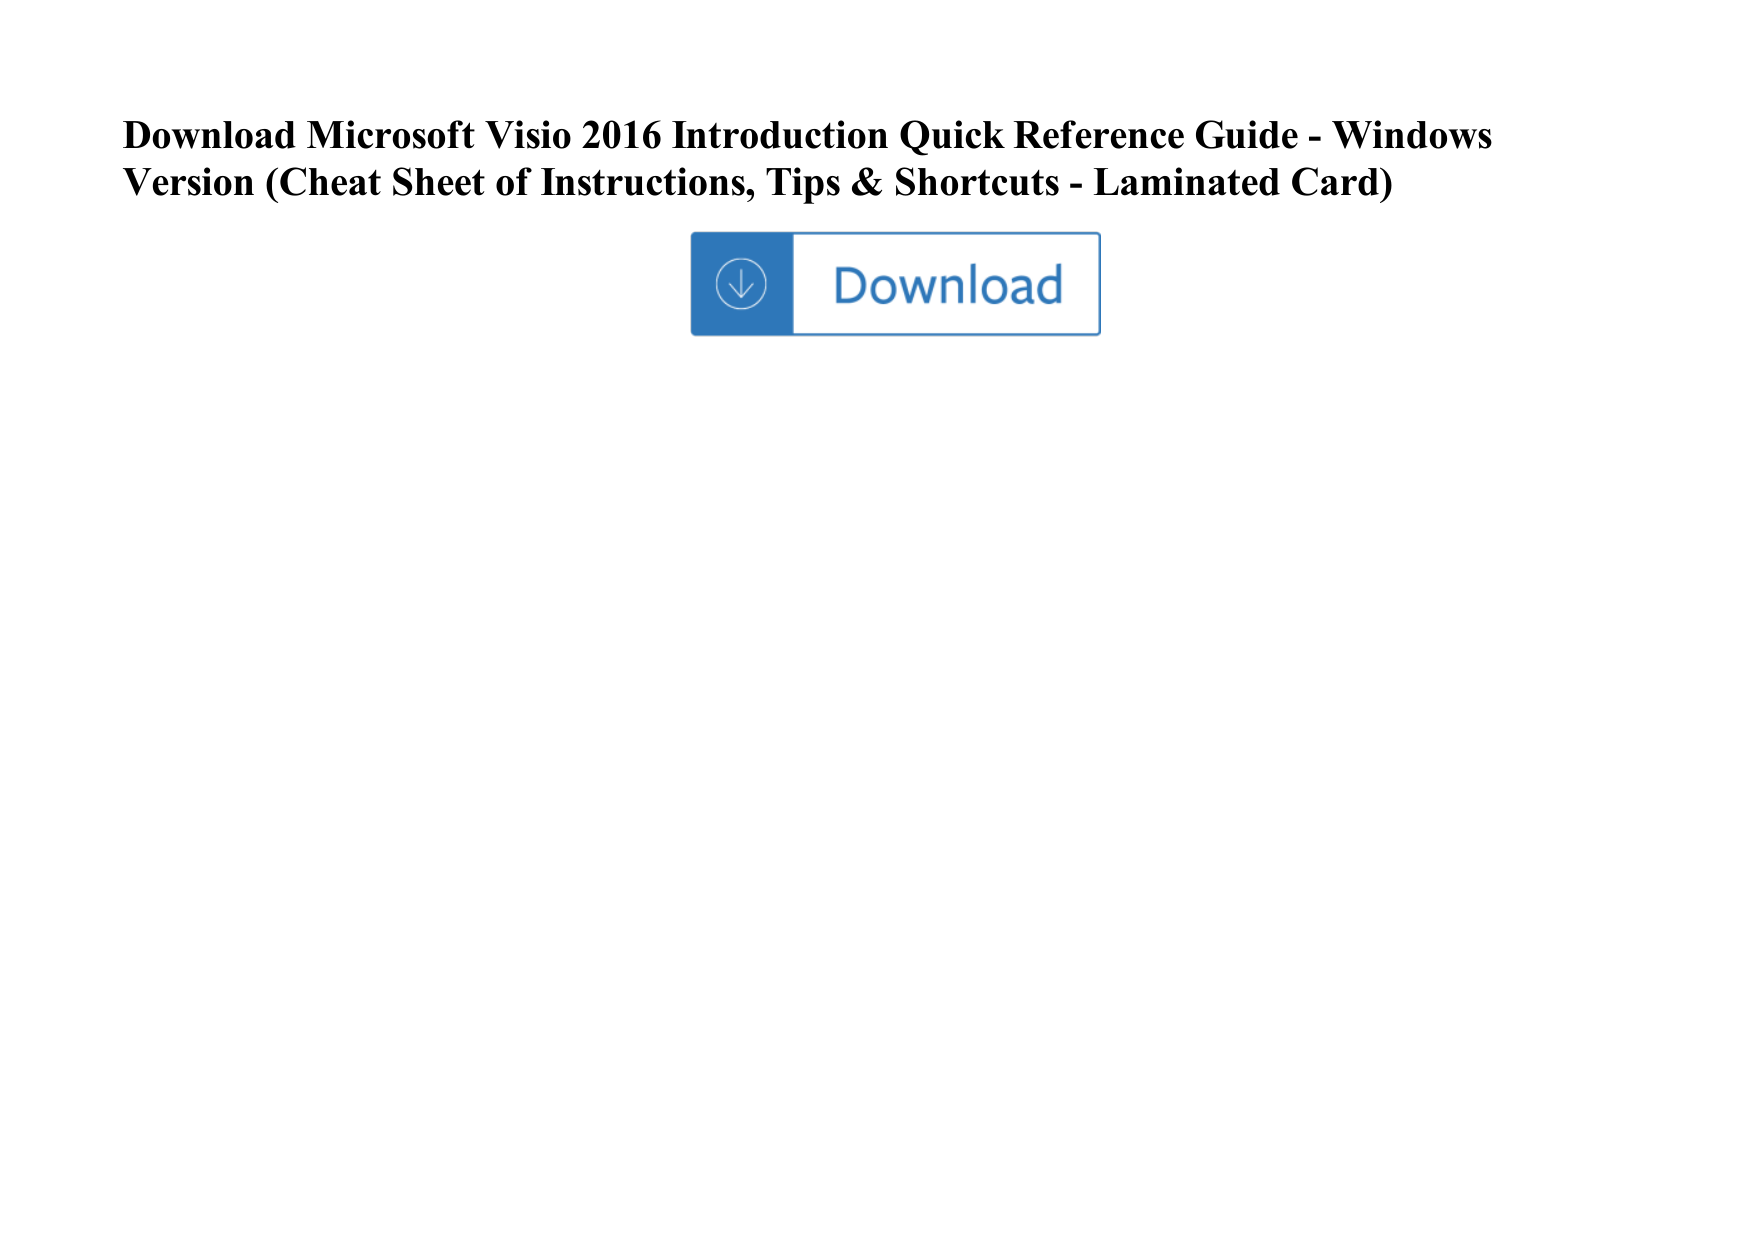 microsoft-visio-2016-introduction-quick-reference-guide-windows-version-cheat-sheet-of